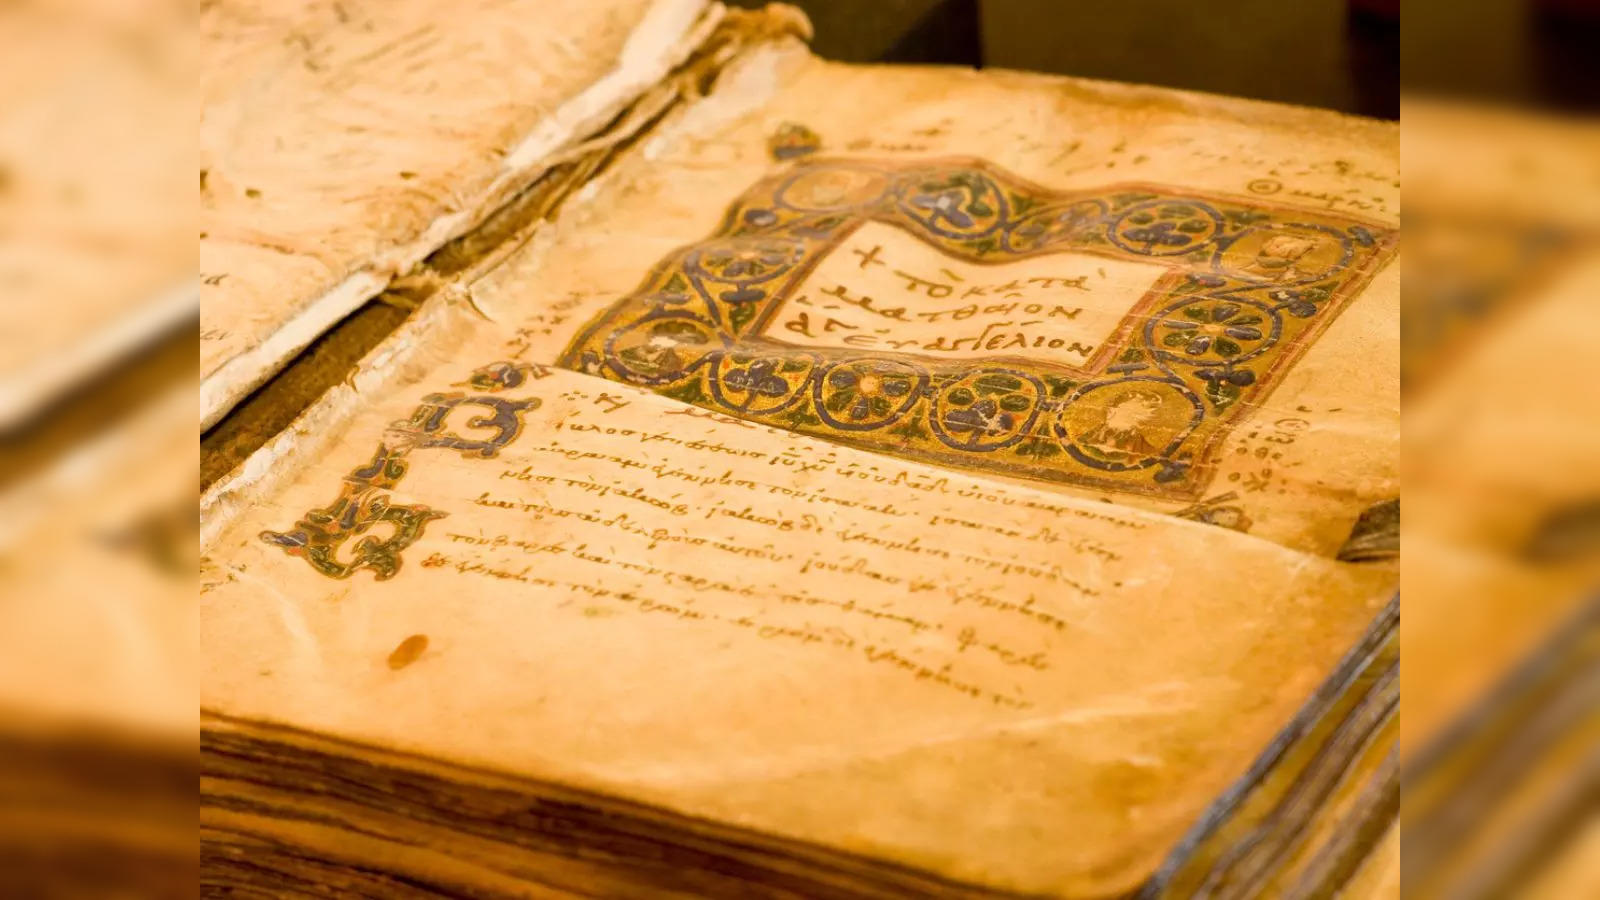 Thousand-year-old Manuscript Returned to Monastery in Greece, by Gaudium  Press English Edition